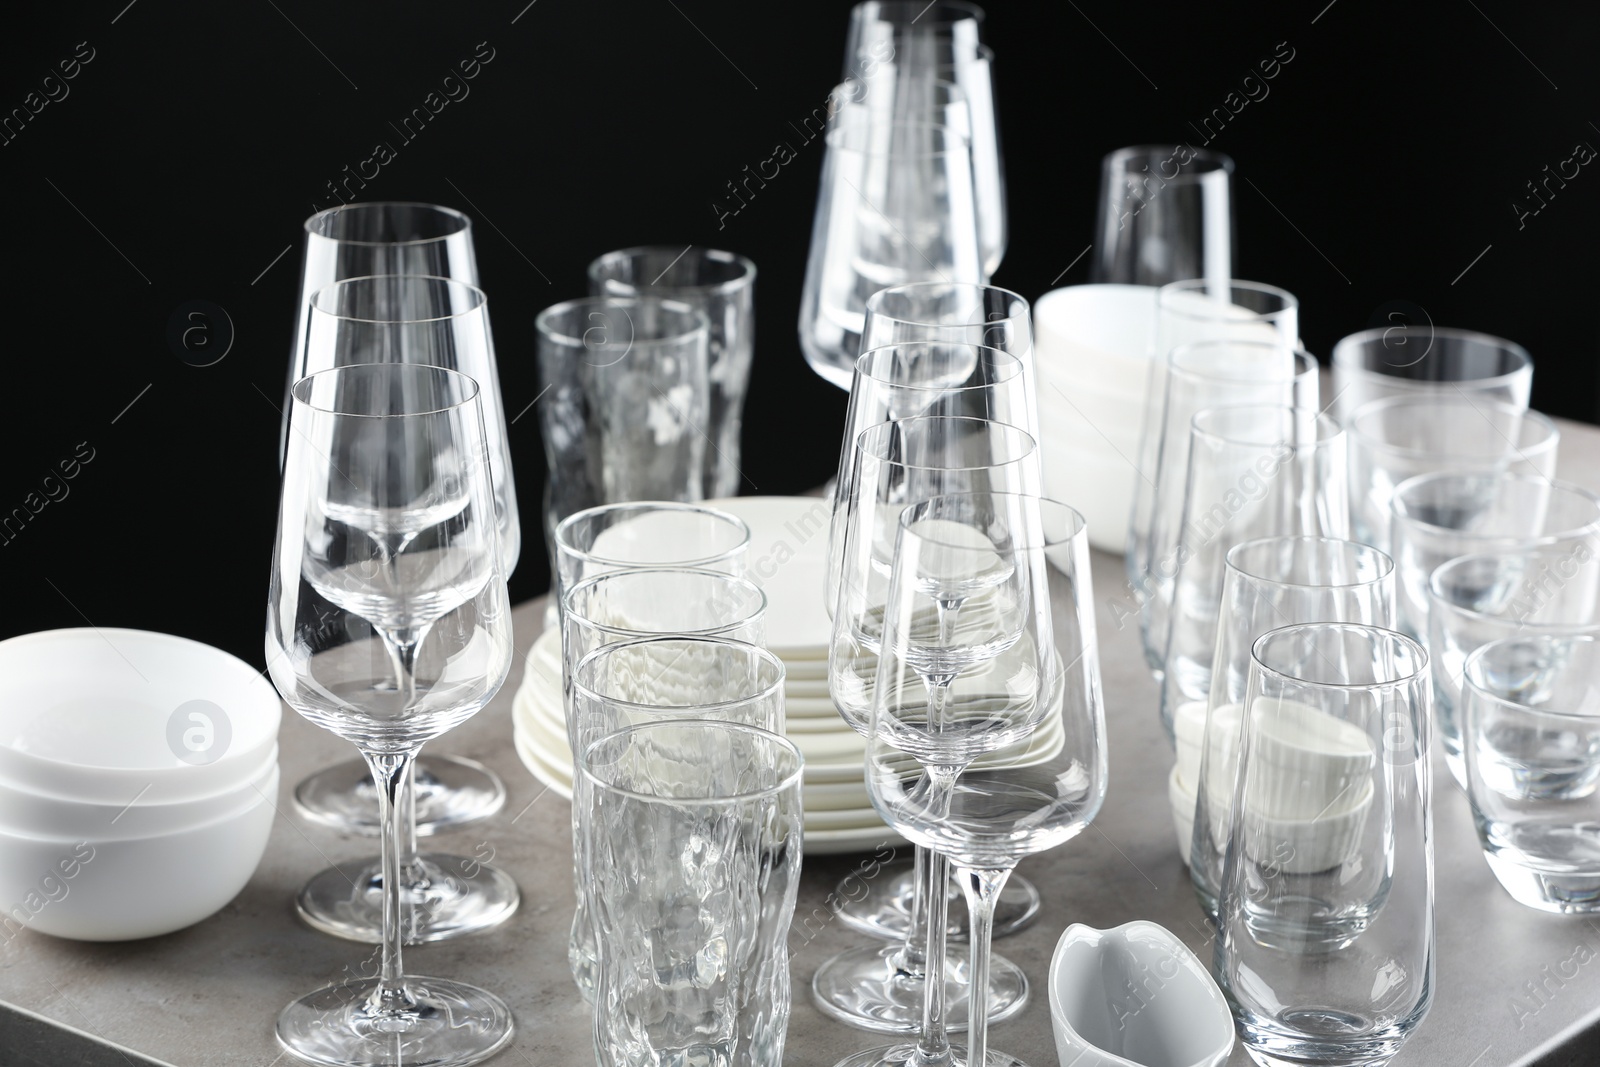 Photo of Set of empty glasses and dishware on table against black background